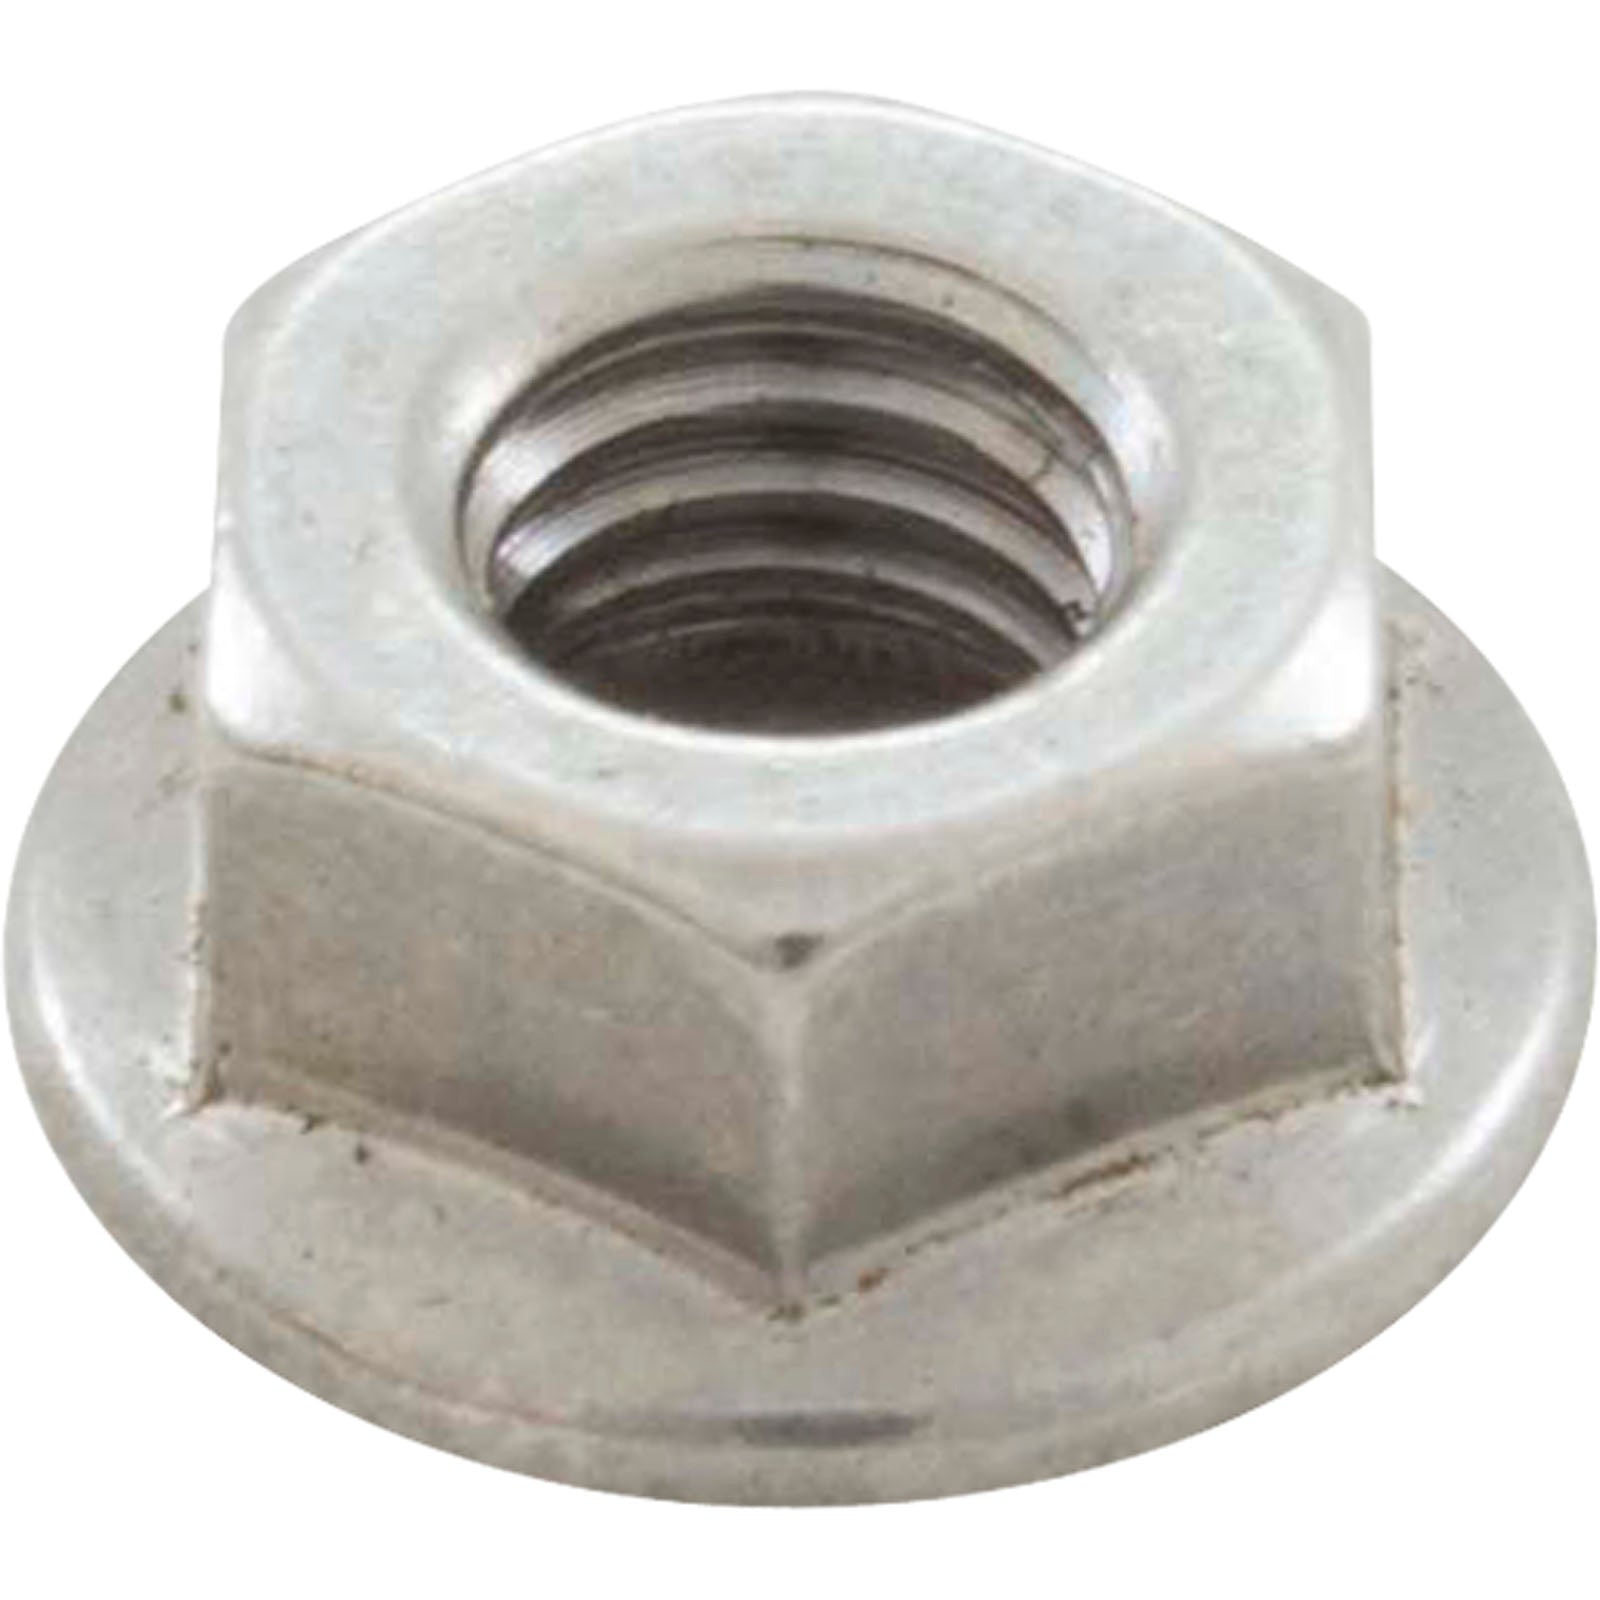 Nut, Speck 95 All Models, Motor Mouting Plate Bolt, M6 Serrated- 2921192015